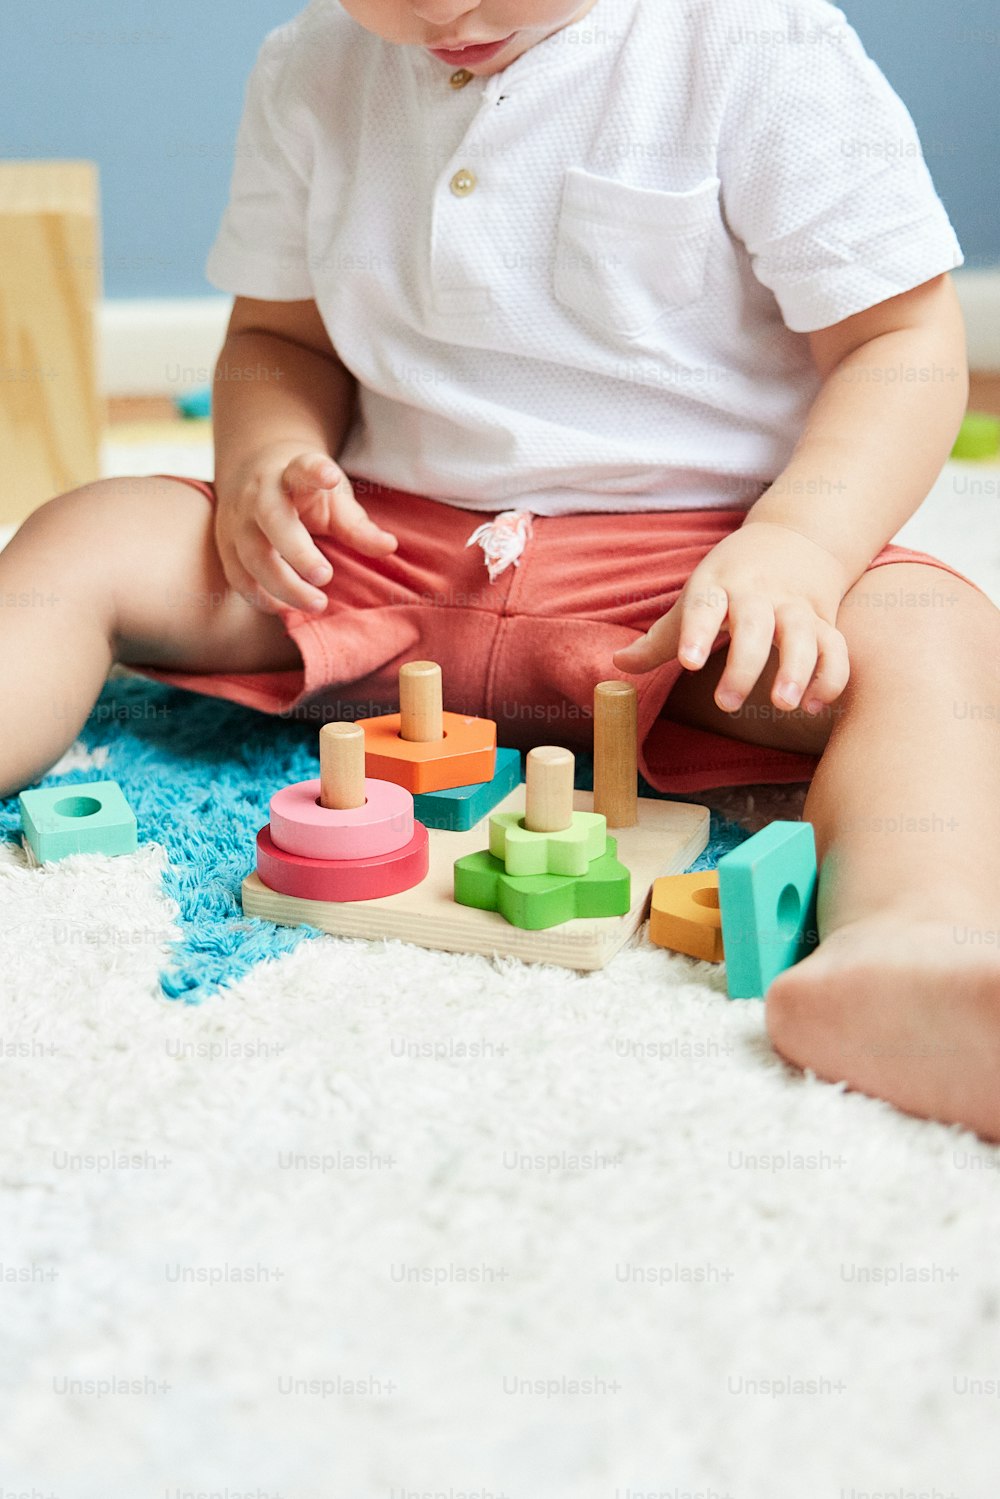 a toddler sitting on the floor playing with toys